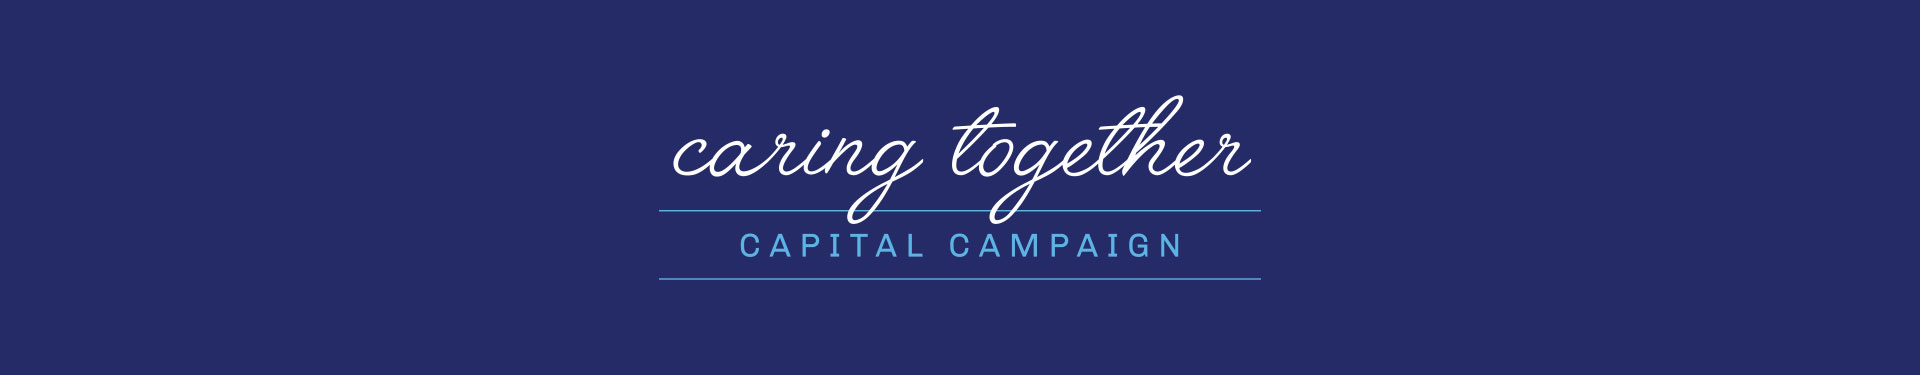 Capital Campaign - Caring Together